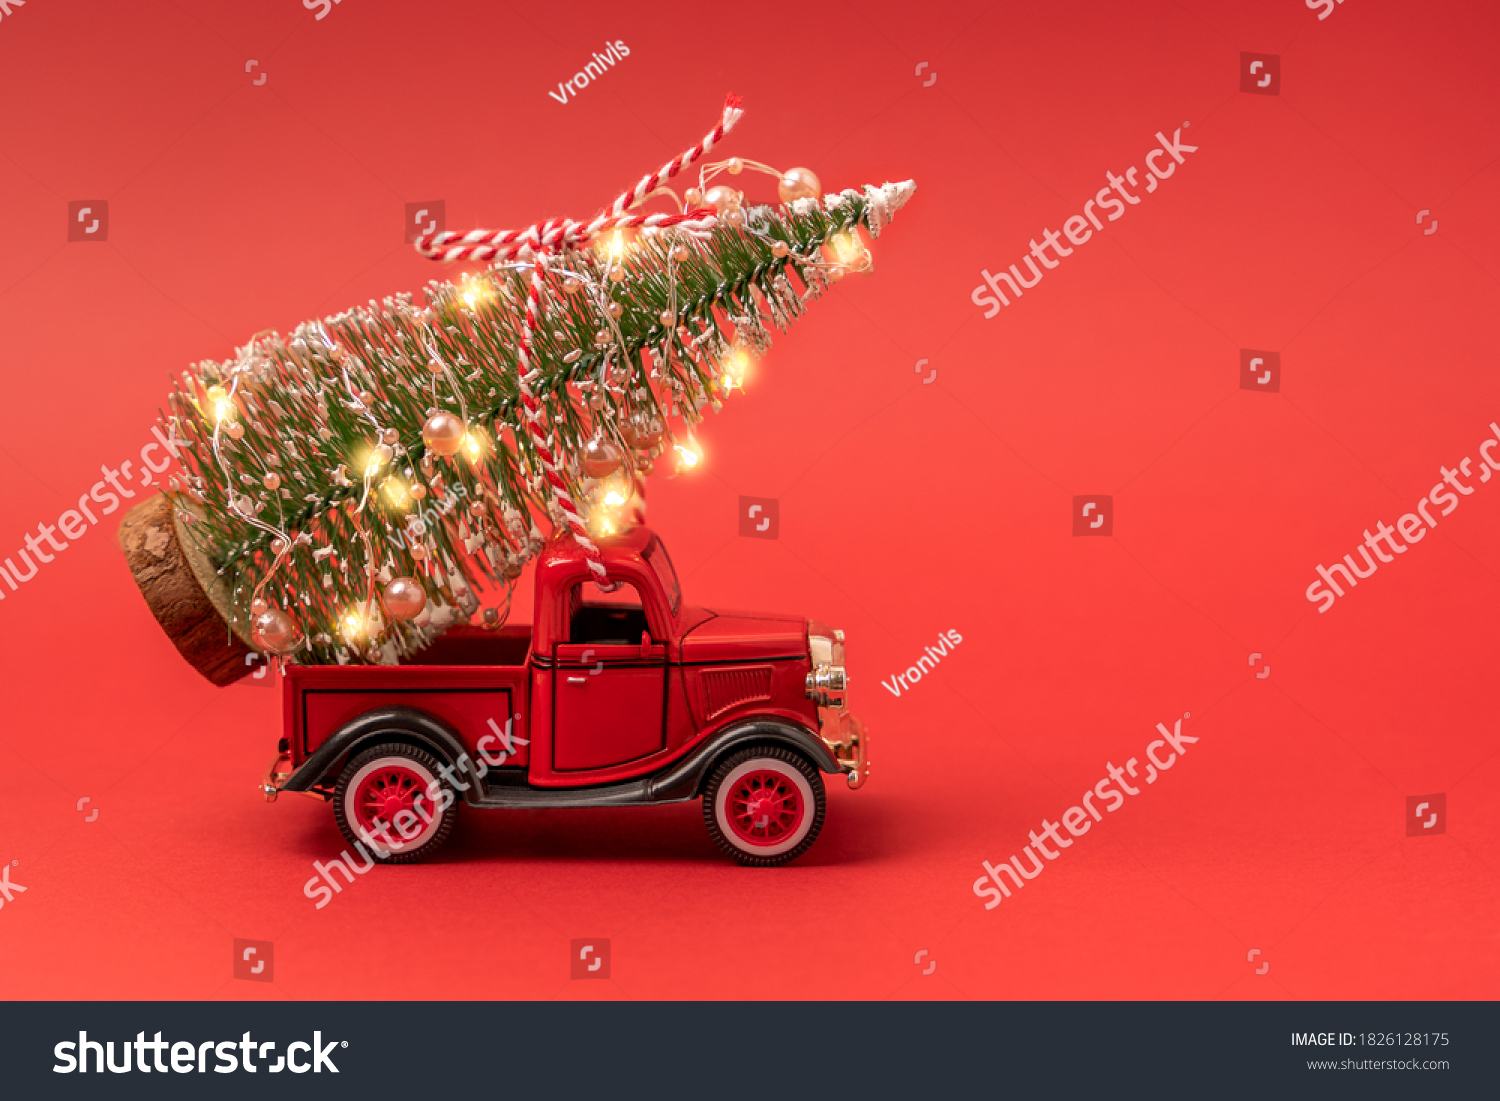 Red small retro toy truck with sparkling Christmas tree lights on truck body on red background. Delivery, christmas, New Year concept. Copy space, selective focus. #1826128175